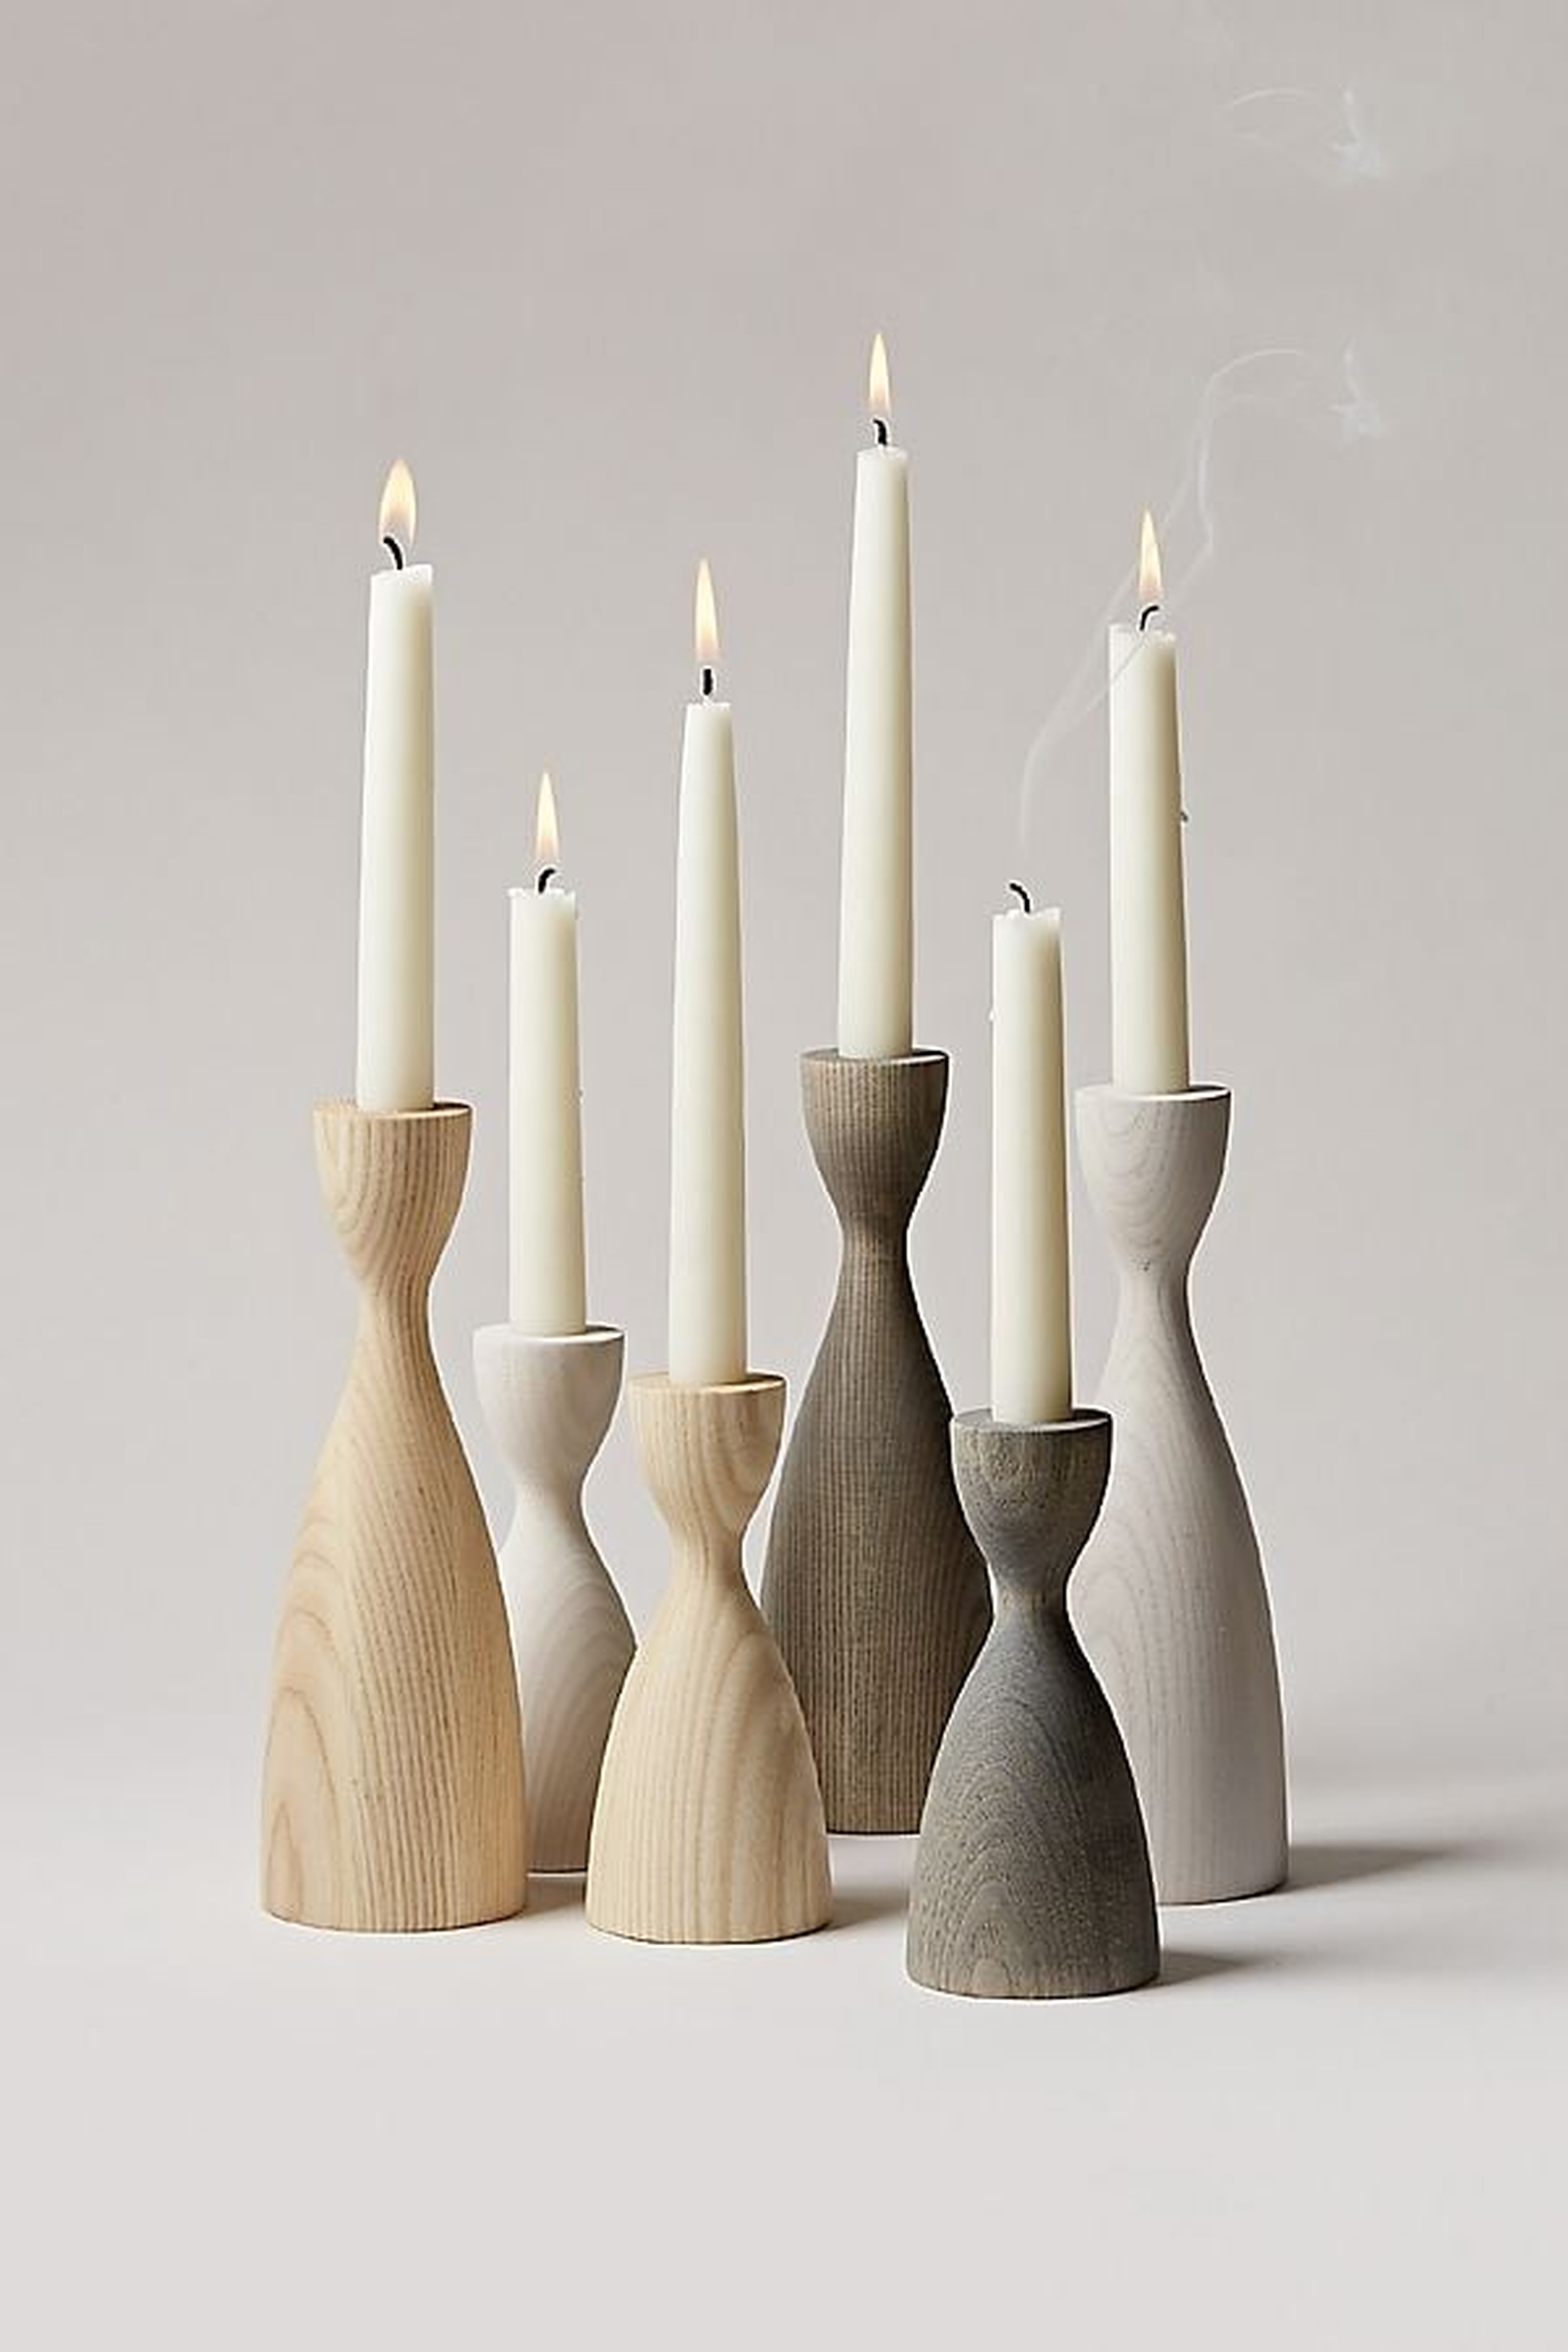 Farmhouse Pottery Pantry Candlestick - Small White ONLY - Anthropologie